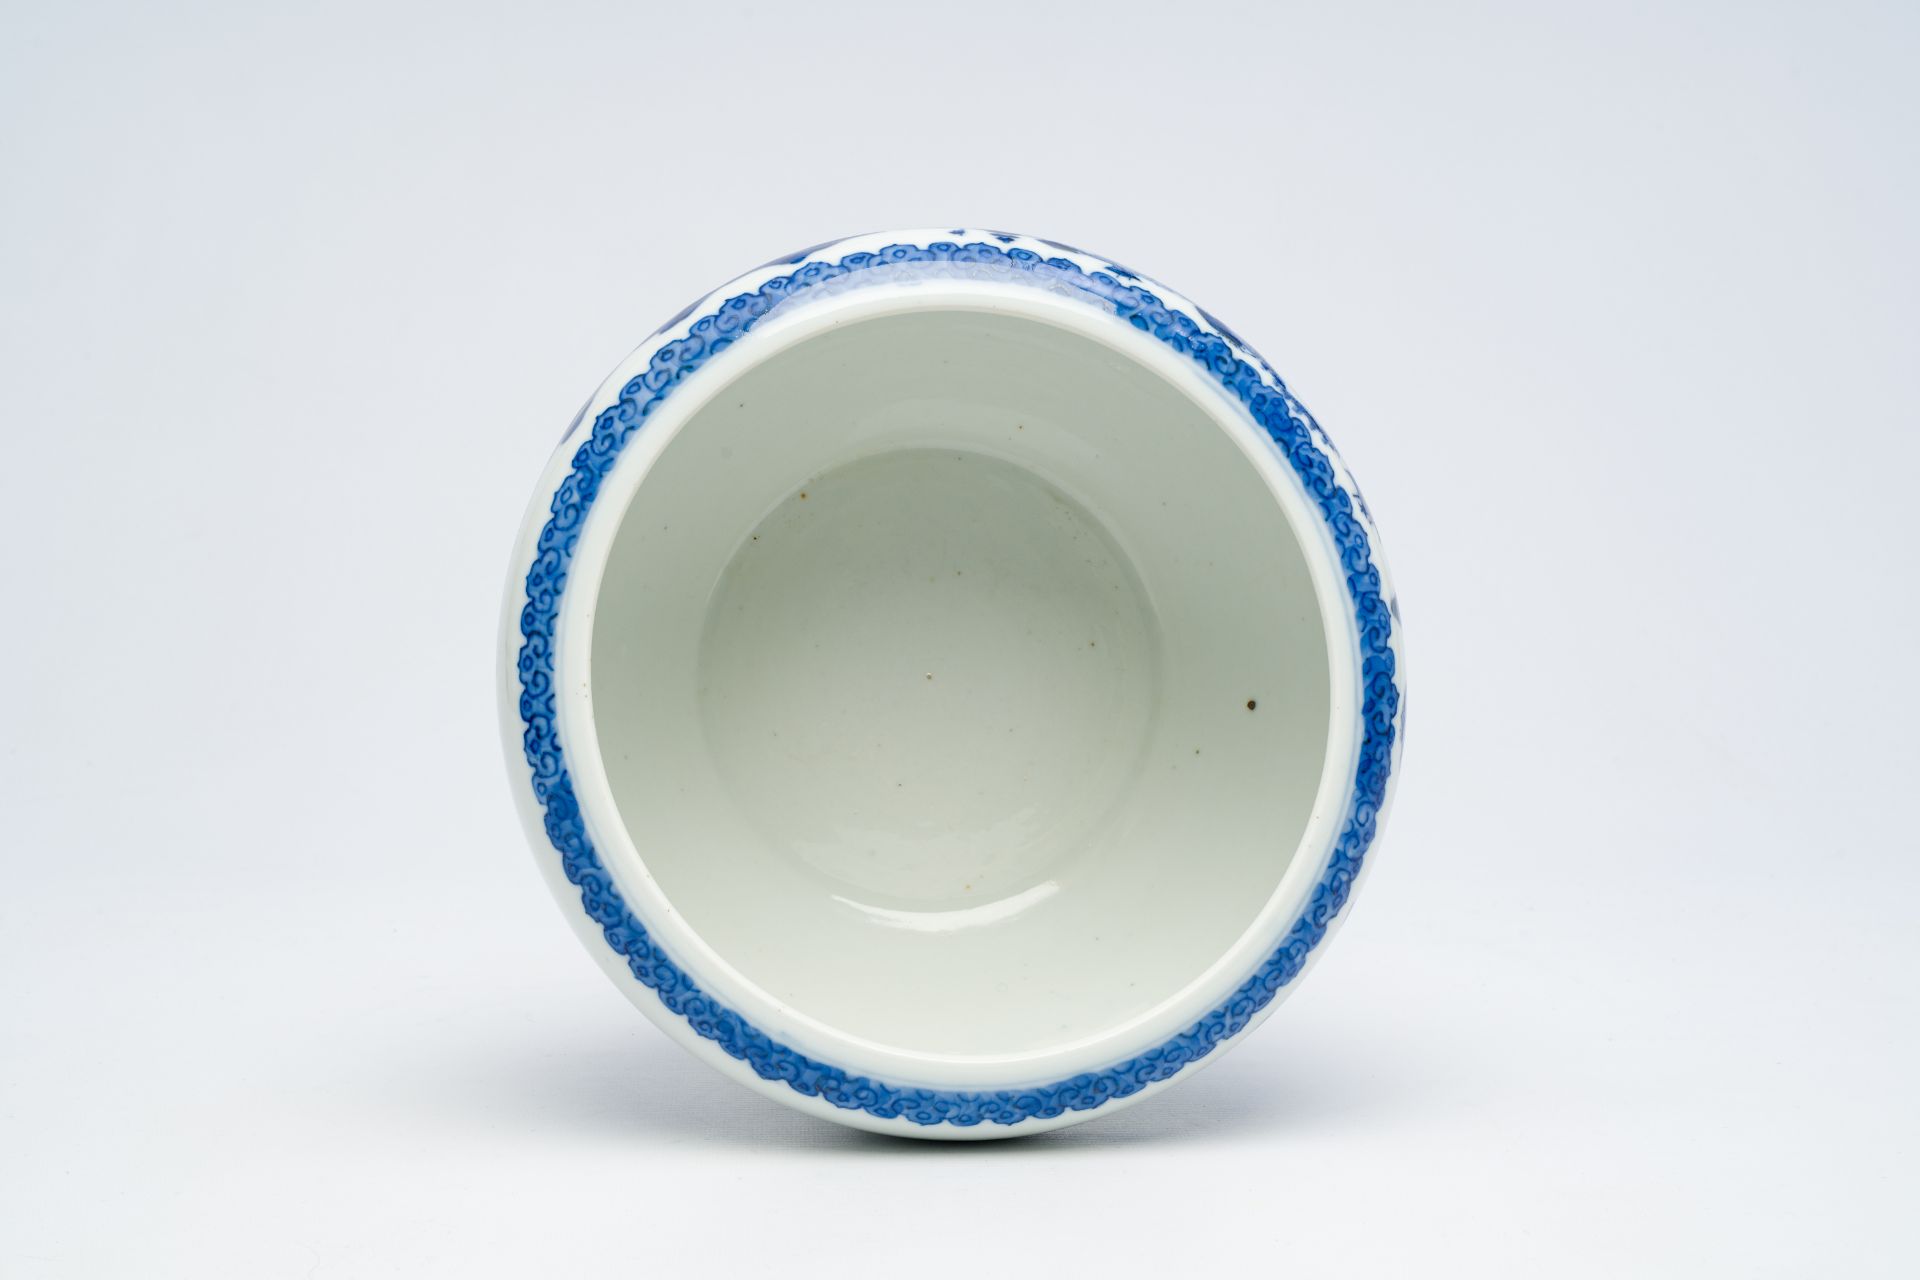 A varied collection of Chinese blue and white porcelain, 19th/20th C. - Image 27 of 30